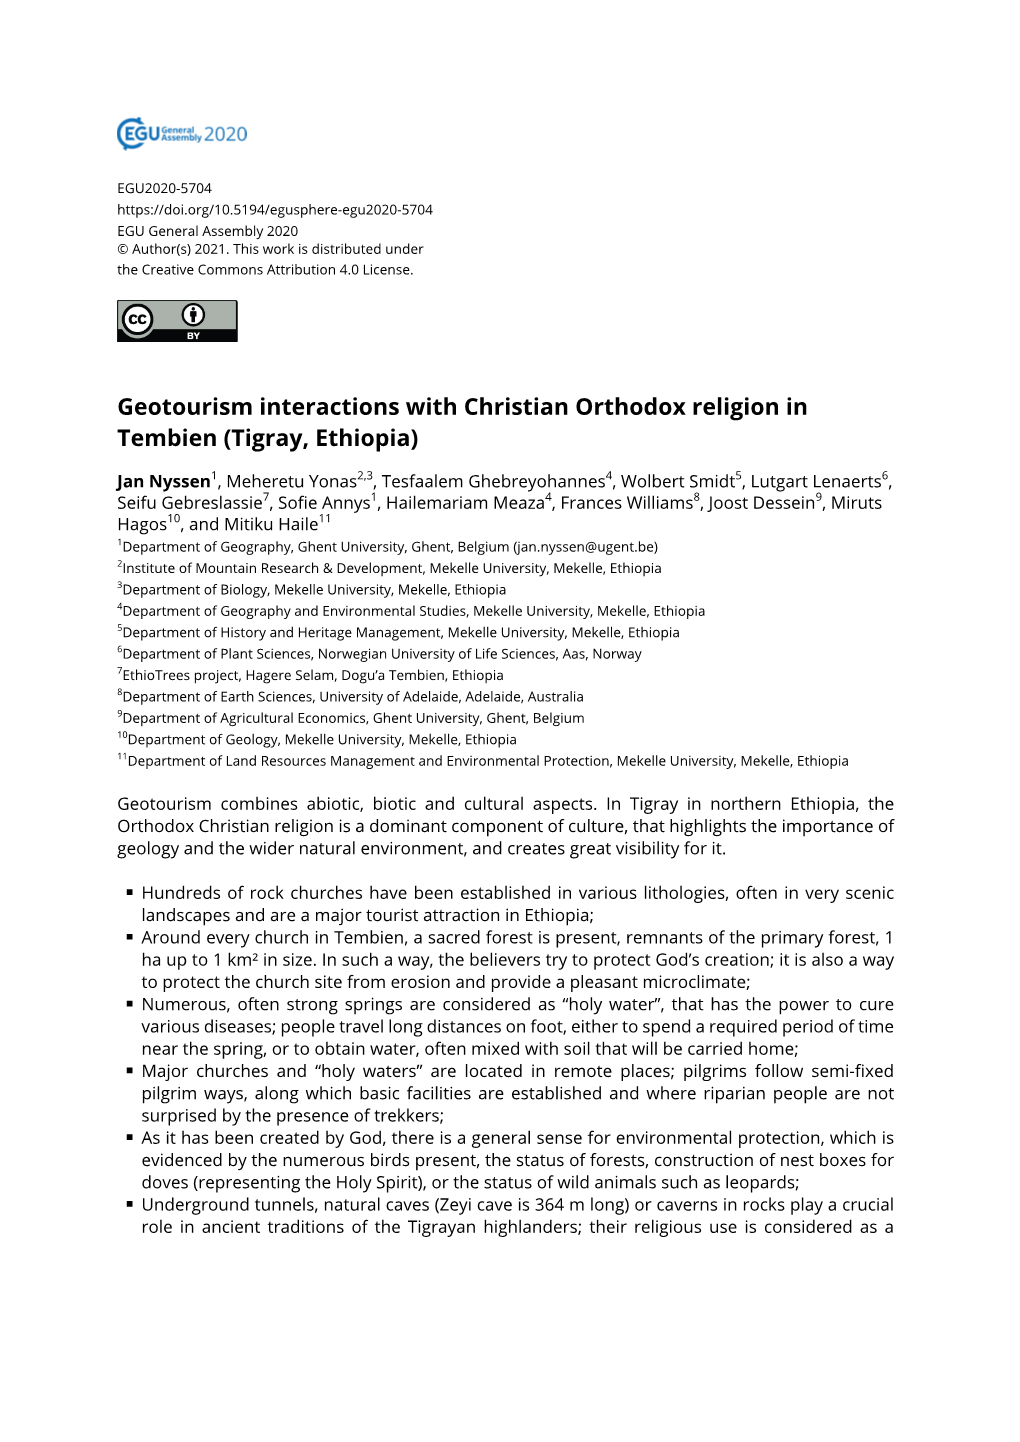 Geotourism Interactions with Christian Orthodox Religion in Tembien (Tigray, Ethiopia)